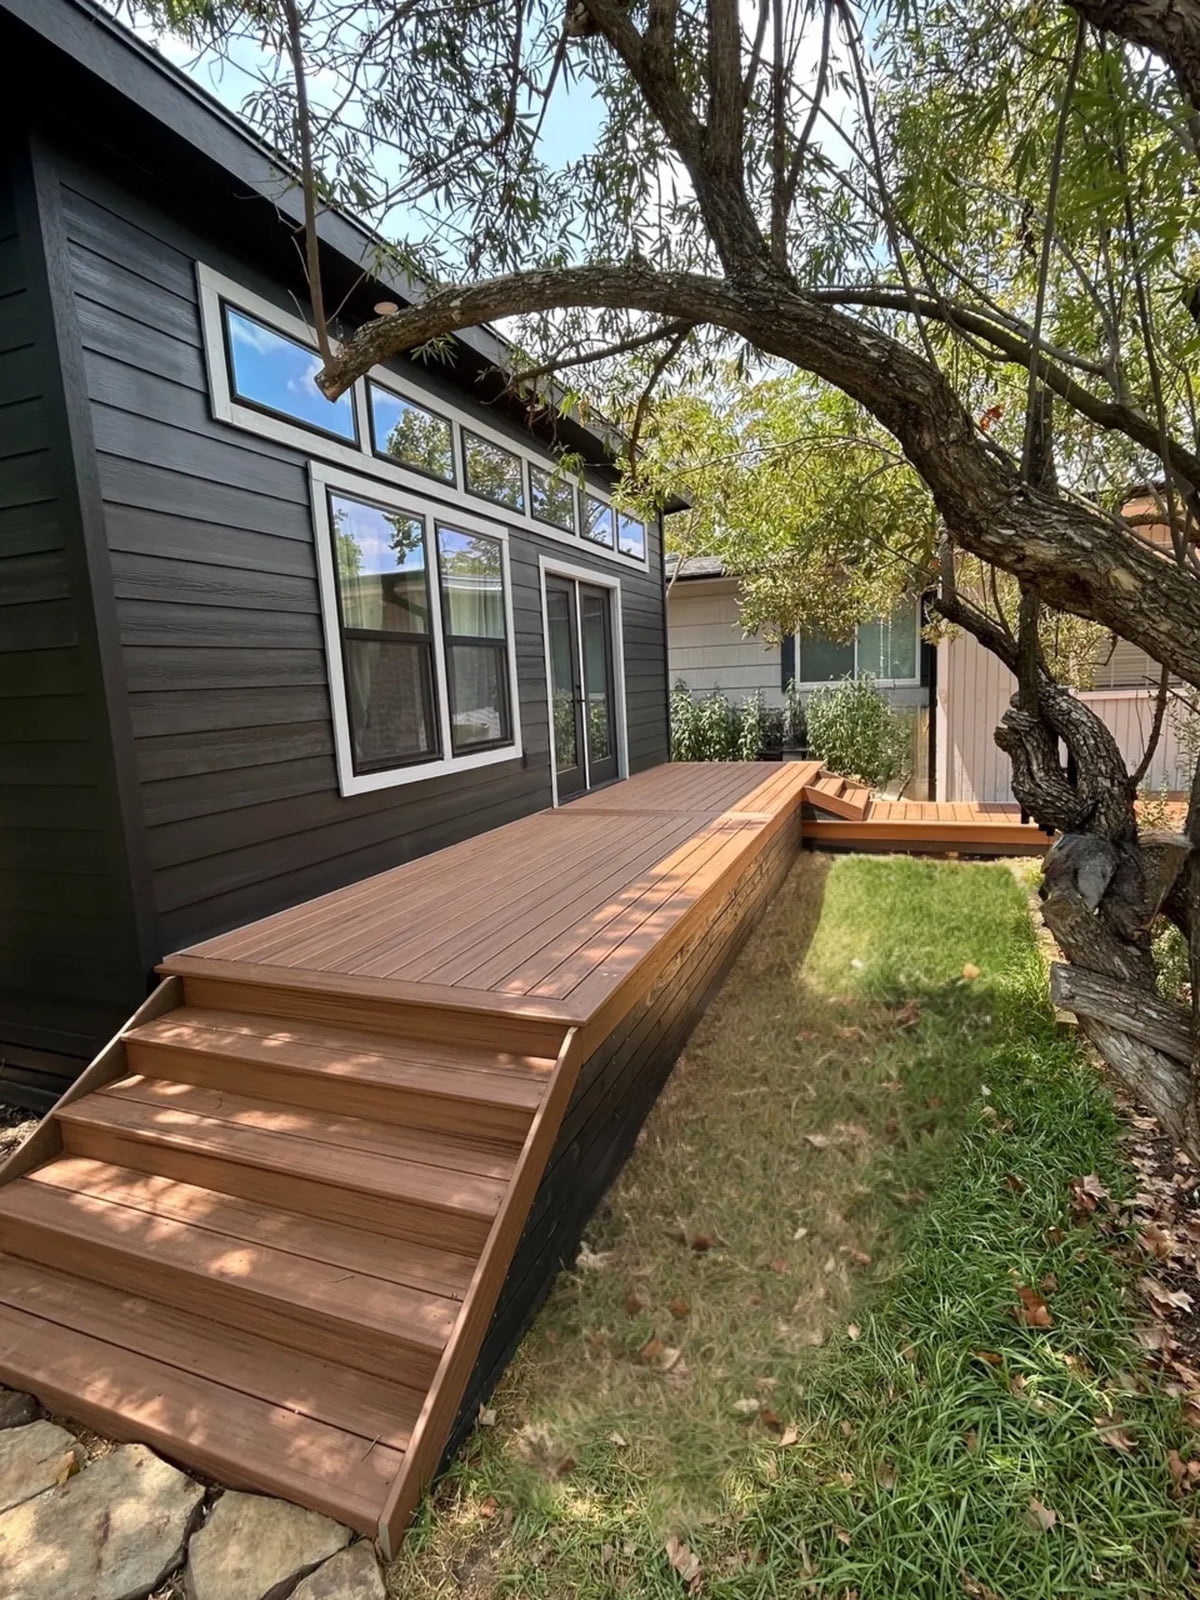 Elbow Rooms: The Tiny Homes Where a Shoebox Becomes a Mansion